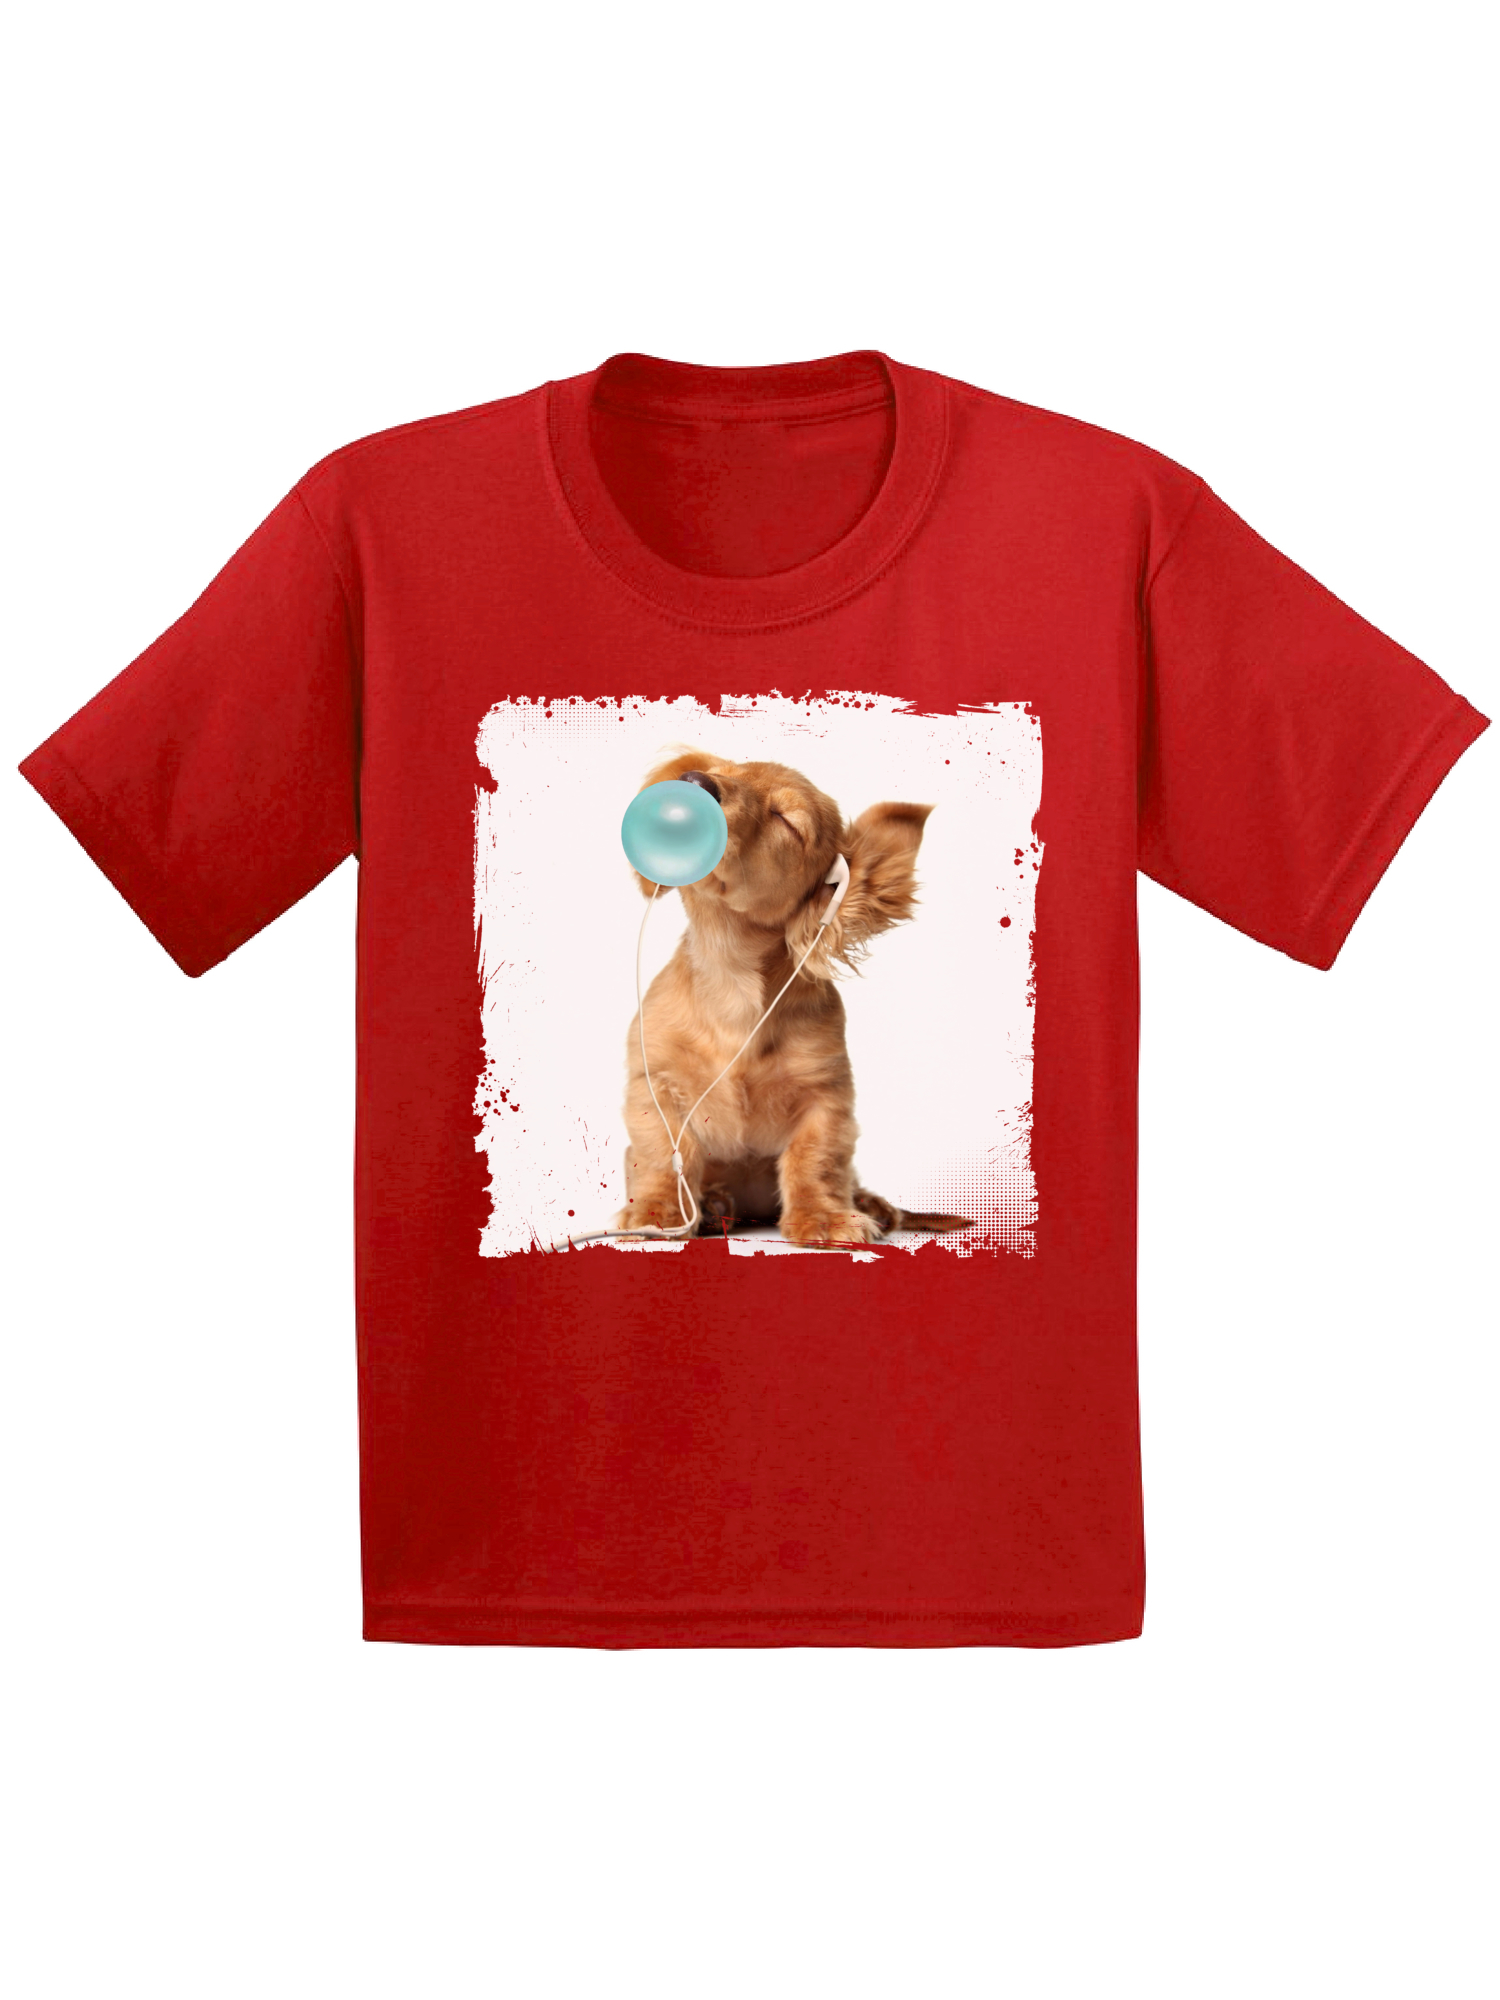 Awkward Styles Dog Outfit Cute Animal Collection Funny Puppy Dog with Gum Puppy Clothing Puppy Lovers Funny Gifts for Kids Puppy for Kids Dog Tshirt Puppy Dog Toddler Shirt Toddler T Shirt Kids - image 1 of 4